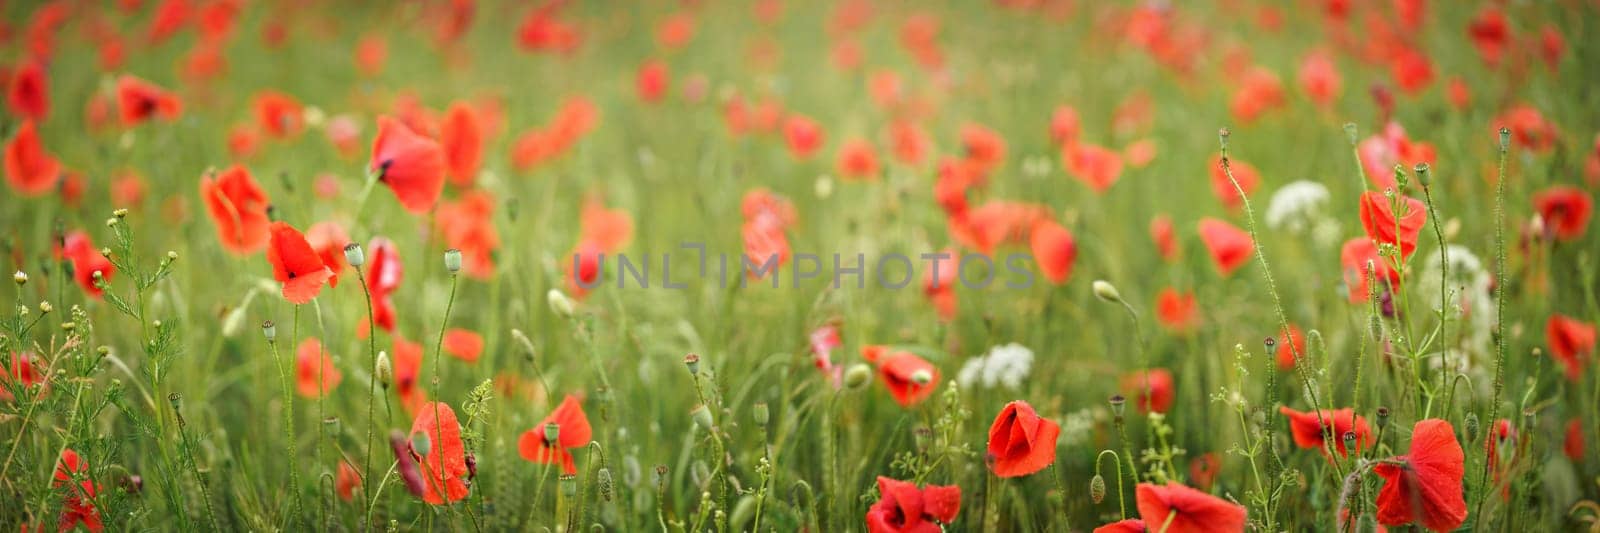 Wild red poppies growing in green wheat. Wide banner with shallow depth of field, only front flowers in focus